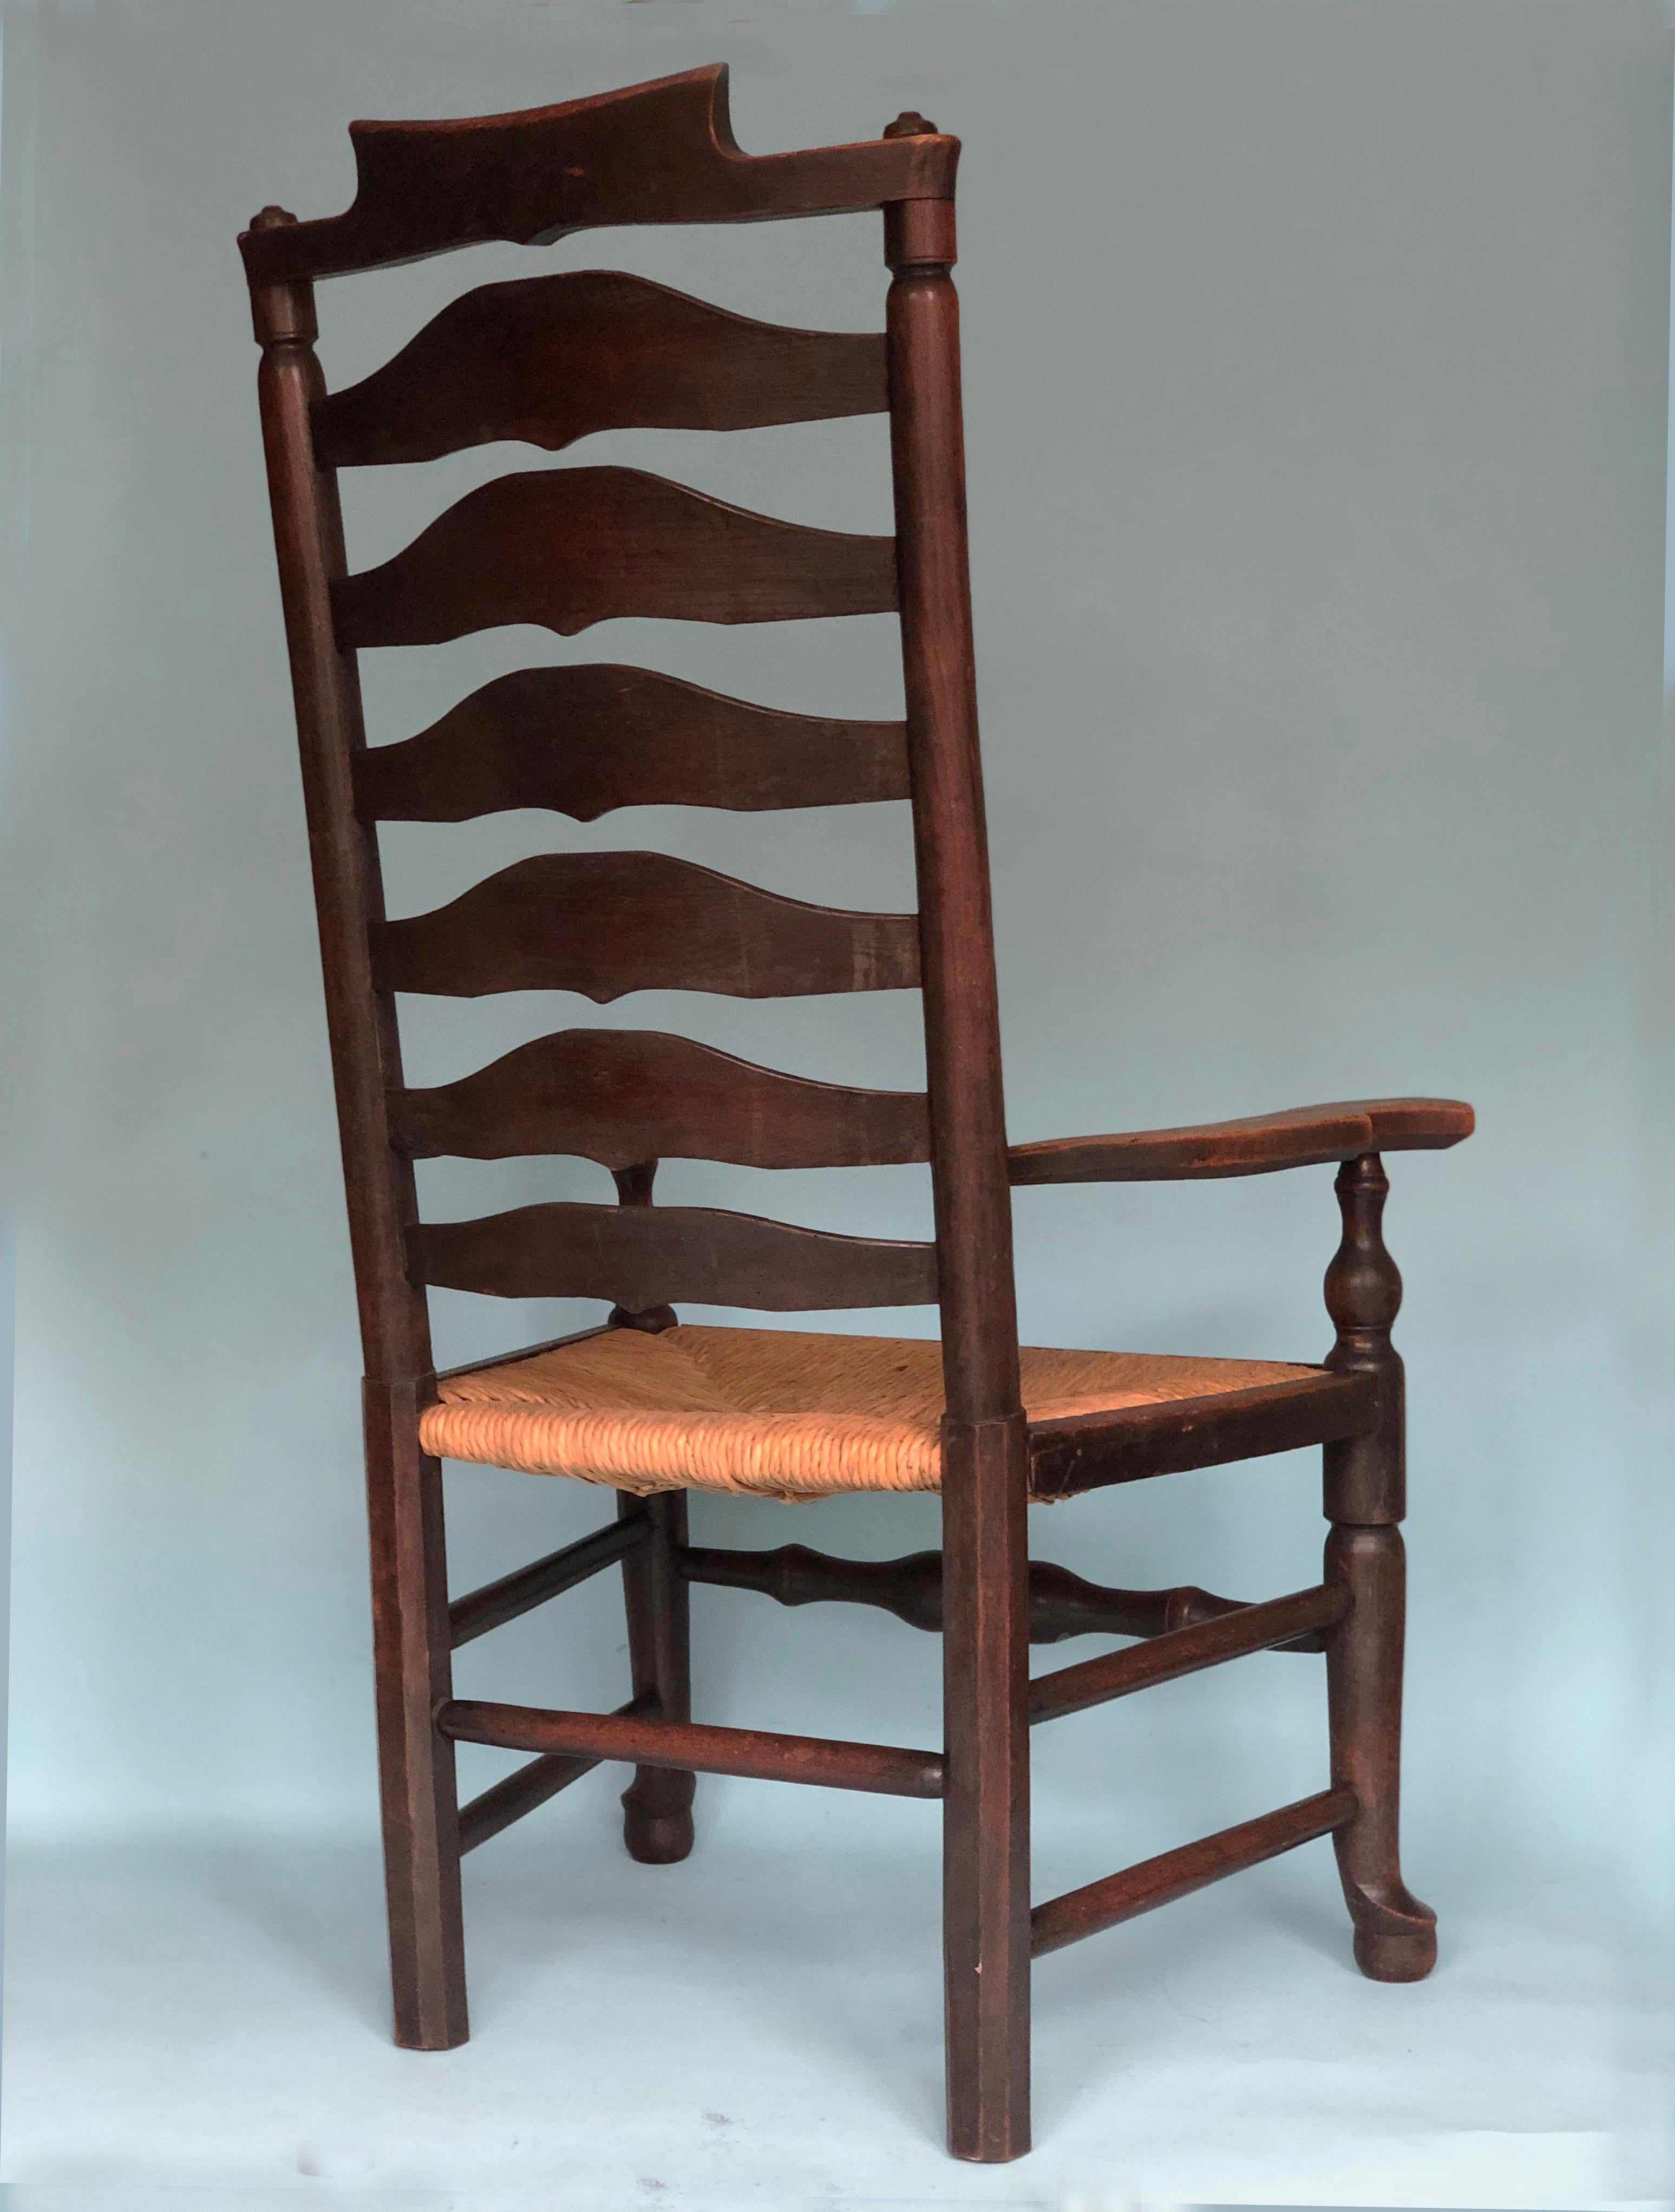 An English Ladder back armchair made in the late 19th century. The chair with a high back (7 “ladders) and rushed seat are in good condition. The wood is nicely weathered.

Object: Armchair
Designer: Unknown
Style: Antique
Period: 1880-1900
Country